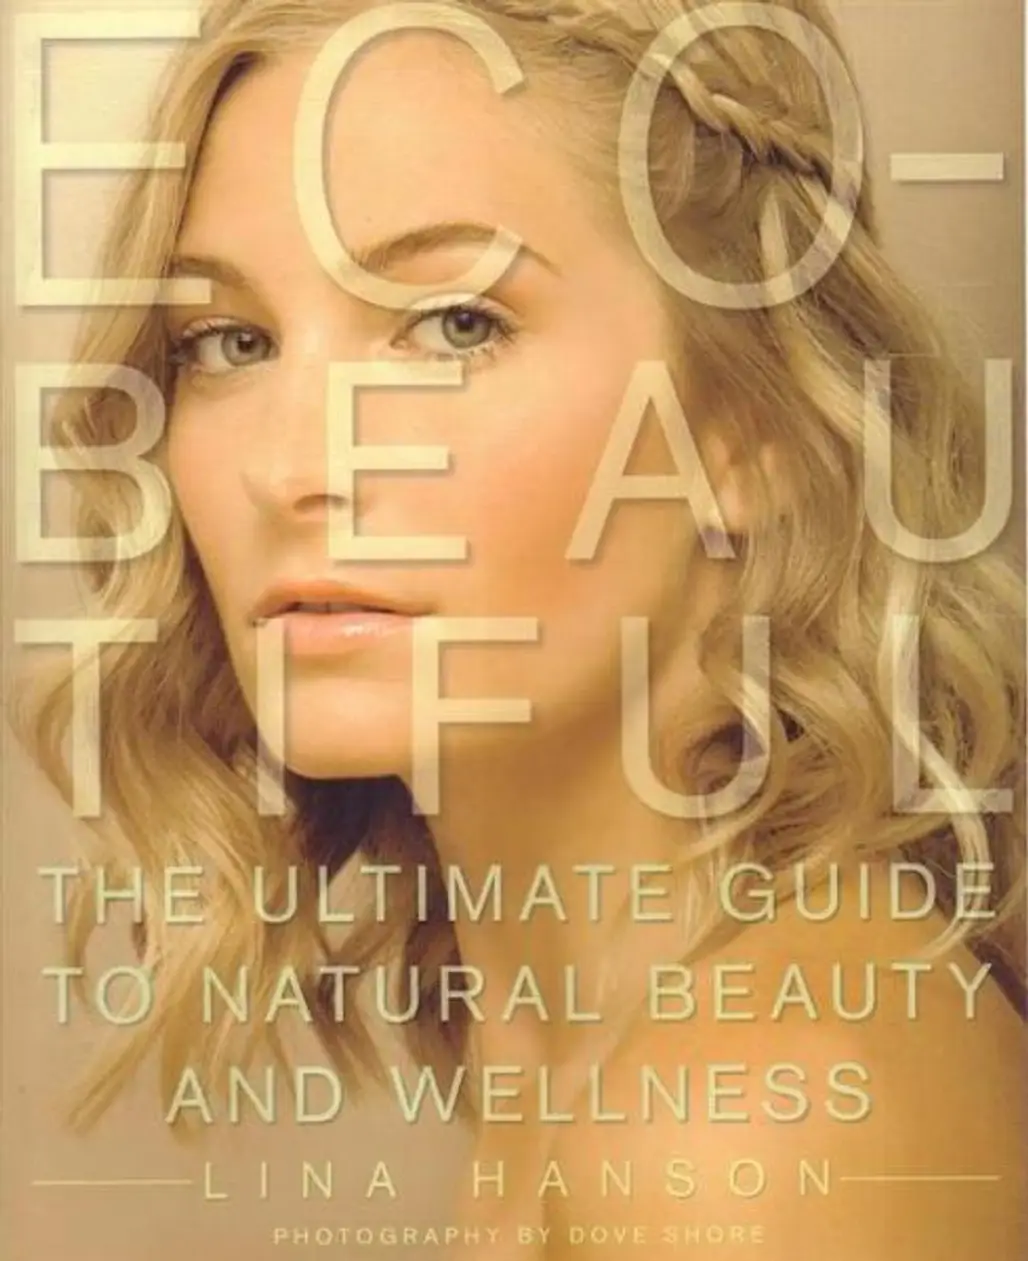 Eco-Beautiful: the Ultimate Guide to Natural Beauty and Wellness by Lina Hanson